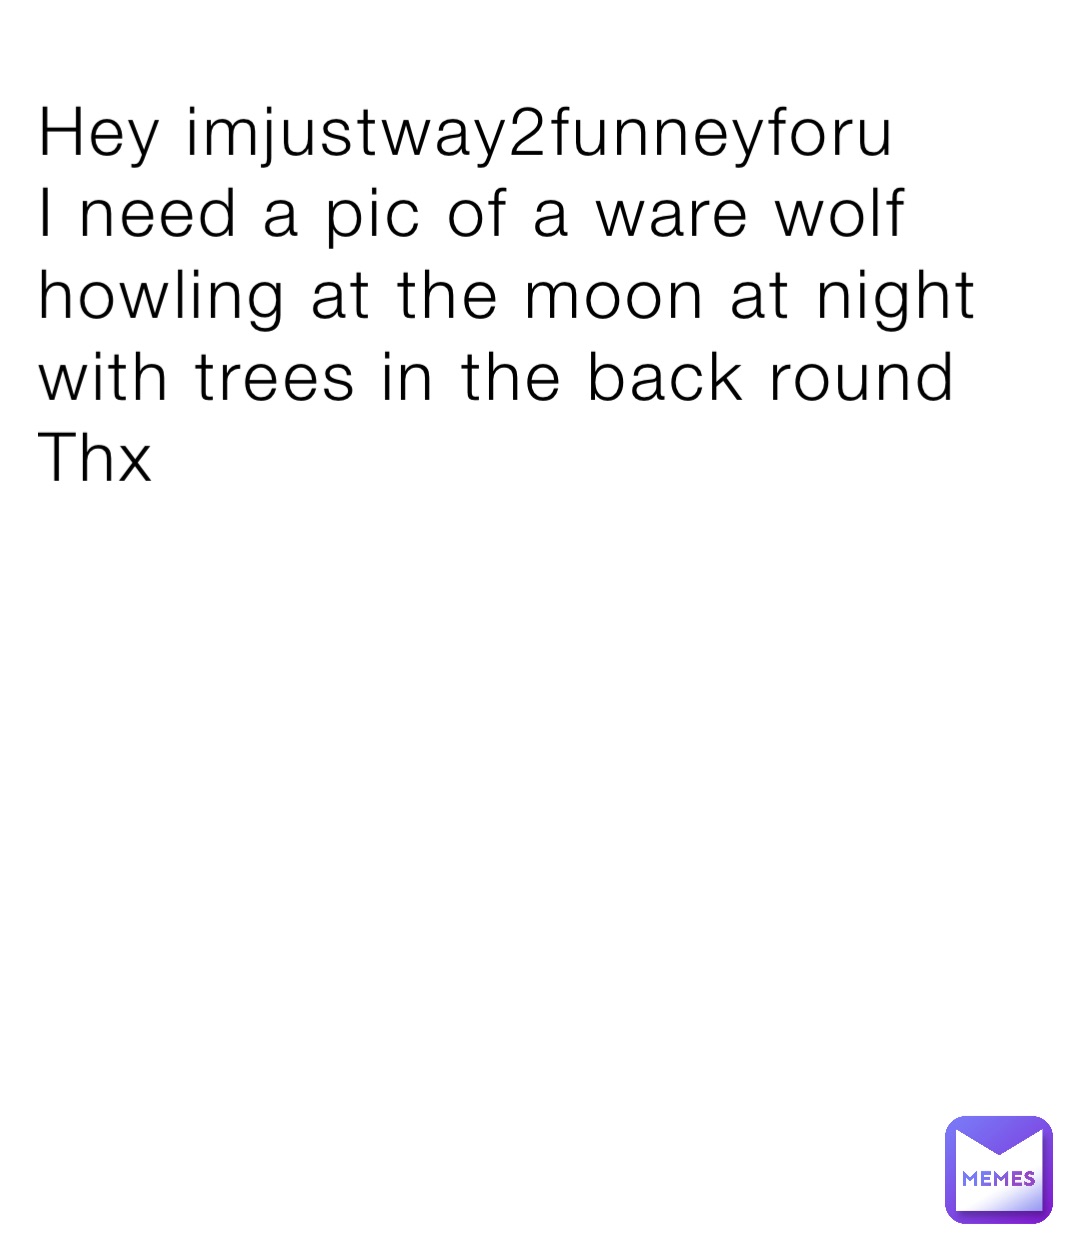 Hey imjustway2funneyforu 
I need a pic of a ware wolf howling at the moon at night with trees in the back round
Thx